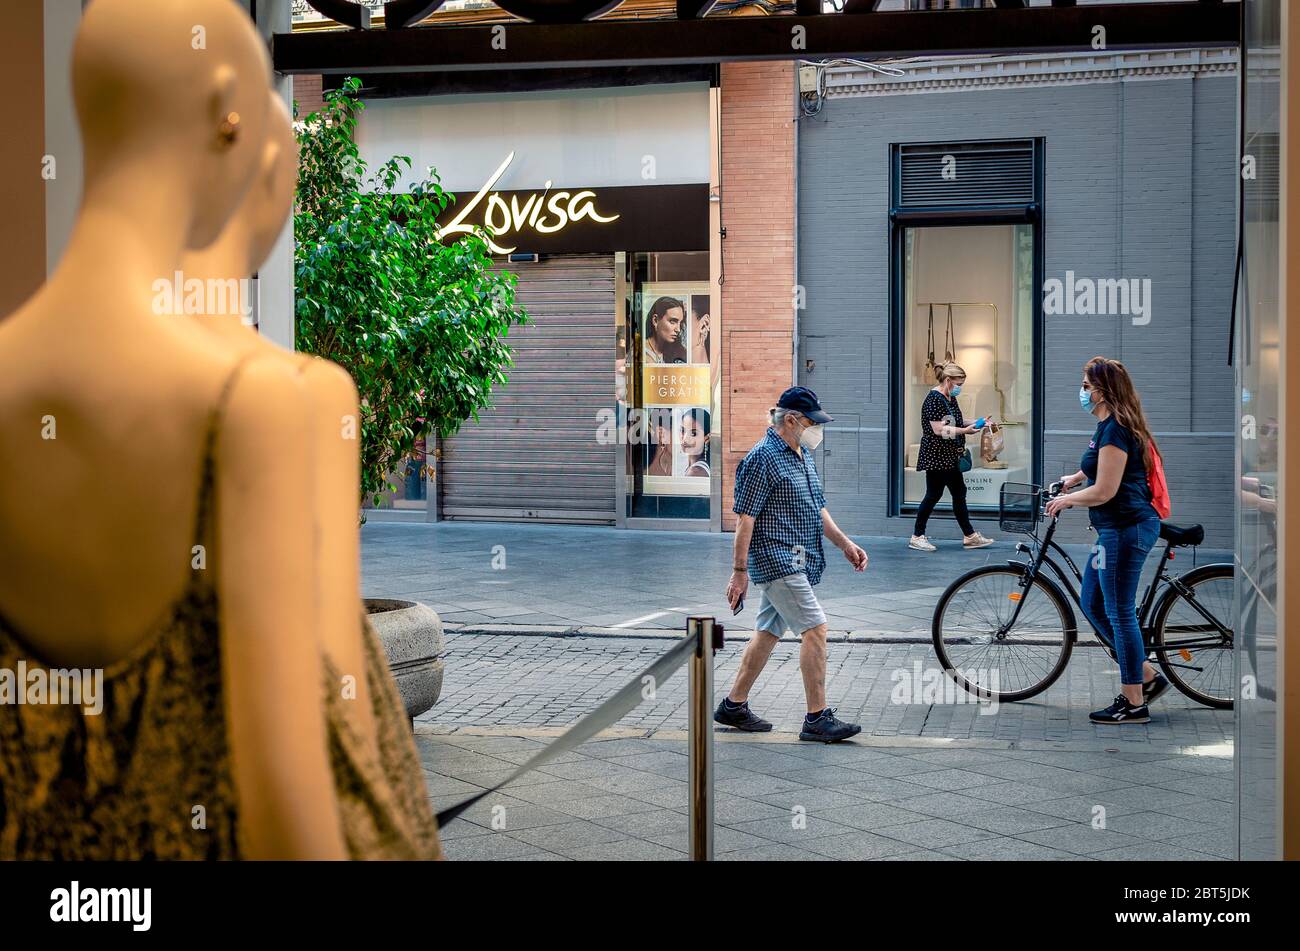 Seville, Spain; May 22, 2020: Blurry people (fast motion) walking on a commercial street after lockdown. Selective focus on the wall on the background Stock Photo